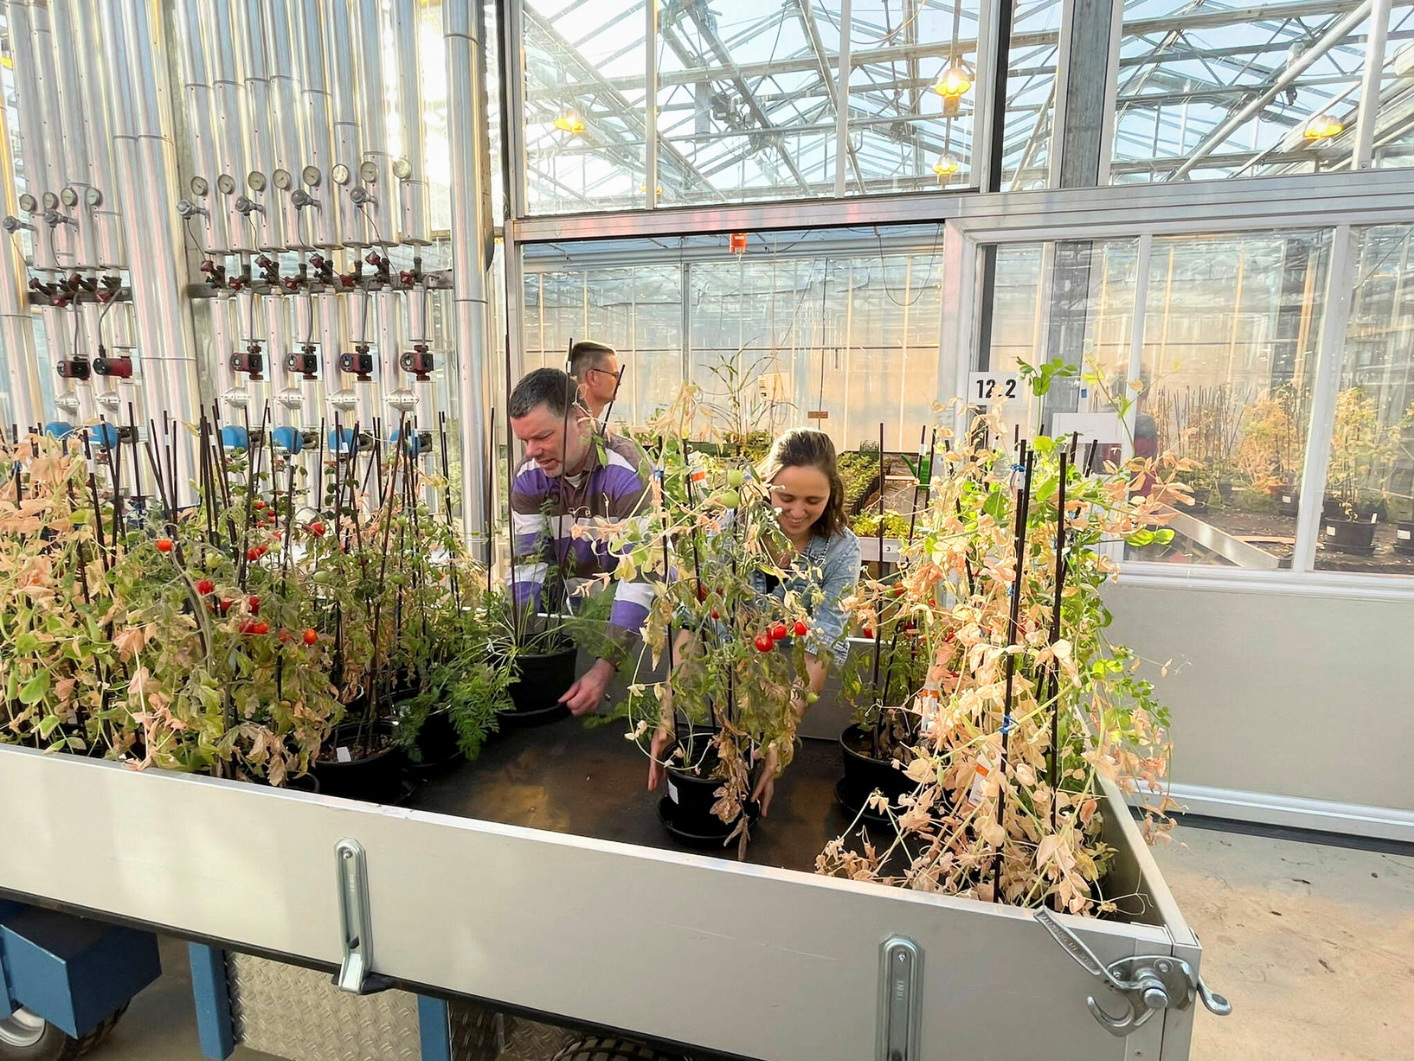 Researchers Wieger Wamelink and Rebeca Goncalves harvest tomatoes, carrots and peas grown in Mars regolith simulant at Wageningen University & Research in the Netherlands. /Rebeca Goncalves/Reuters